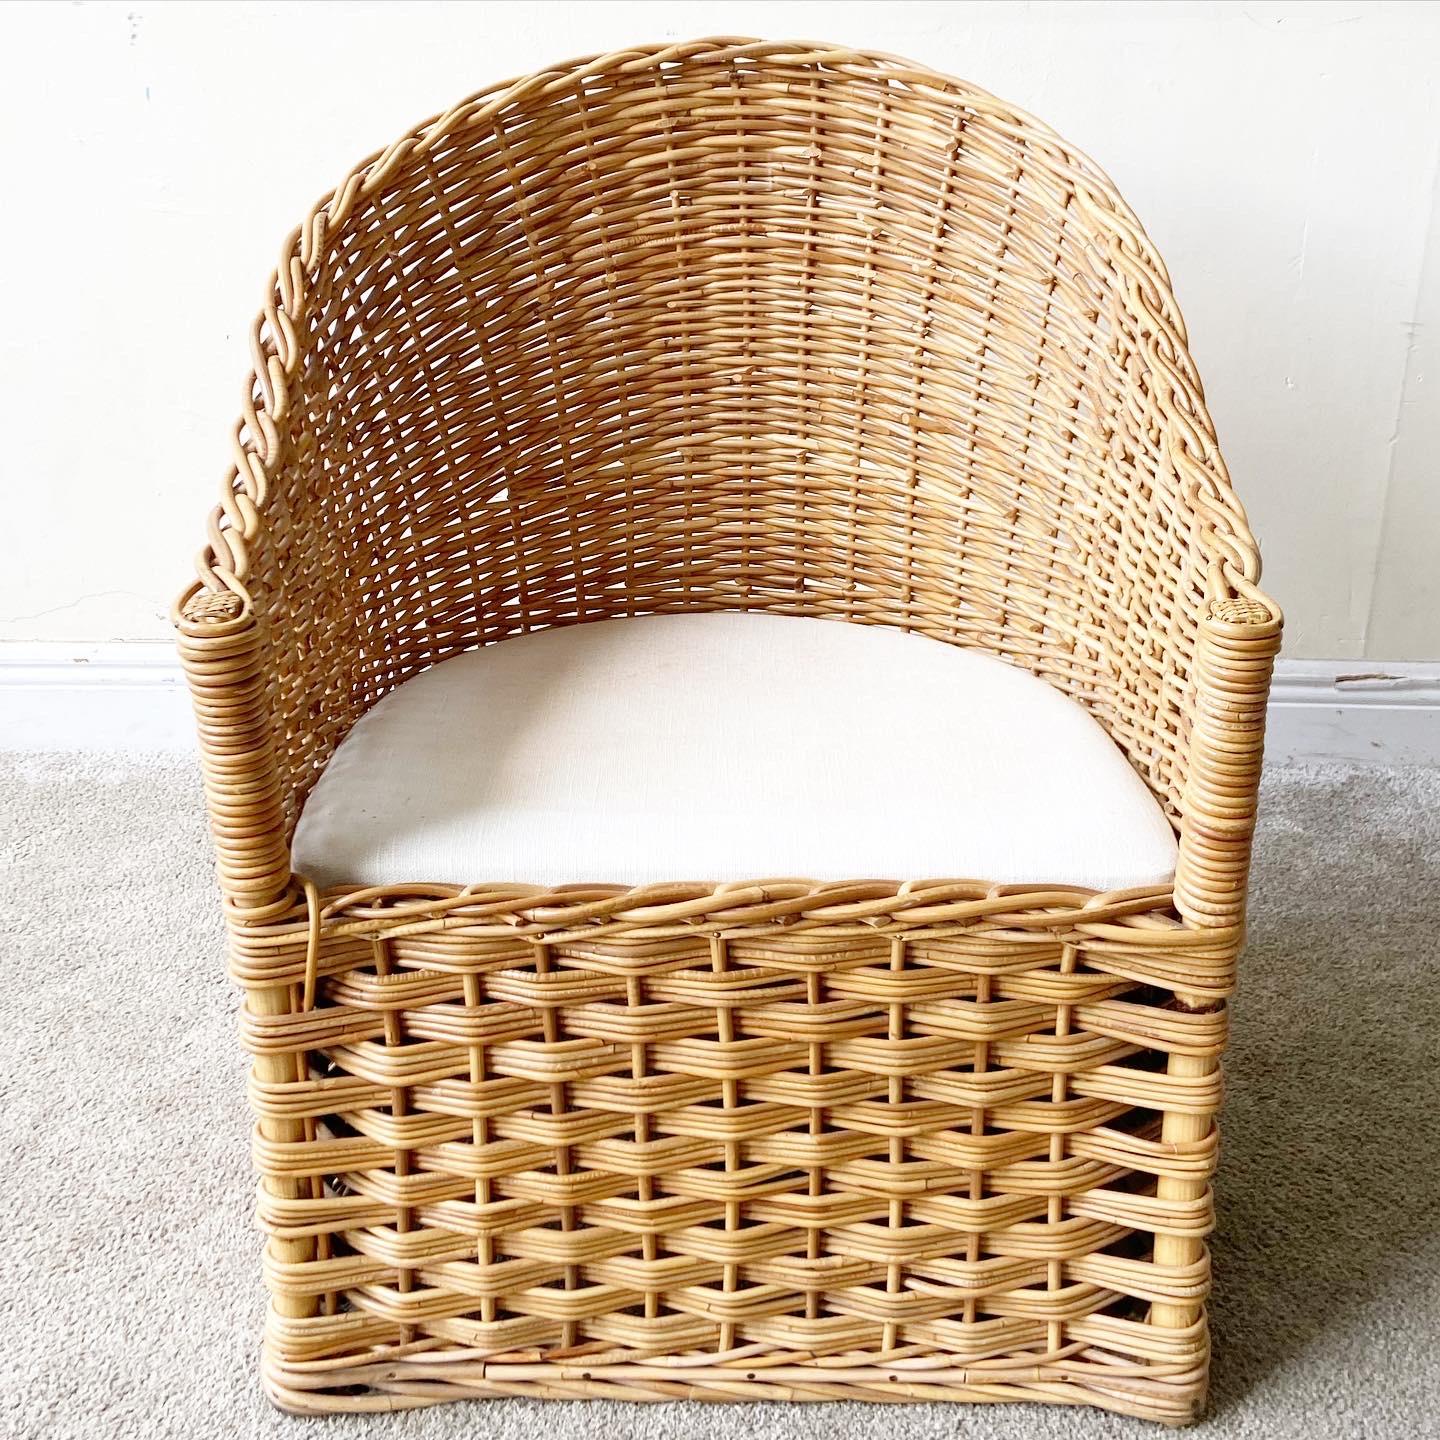 1980s Boho Chic Wicker Barrel Chair With Tufted White Cushions In Good Condition For Sale In Delray Beach, FL